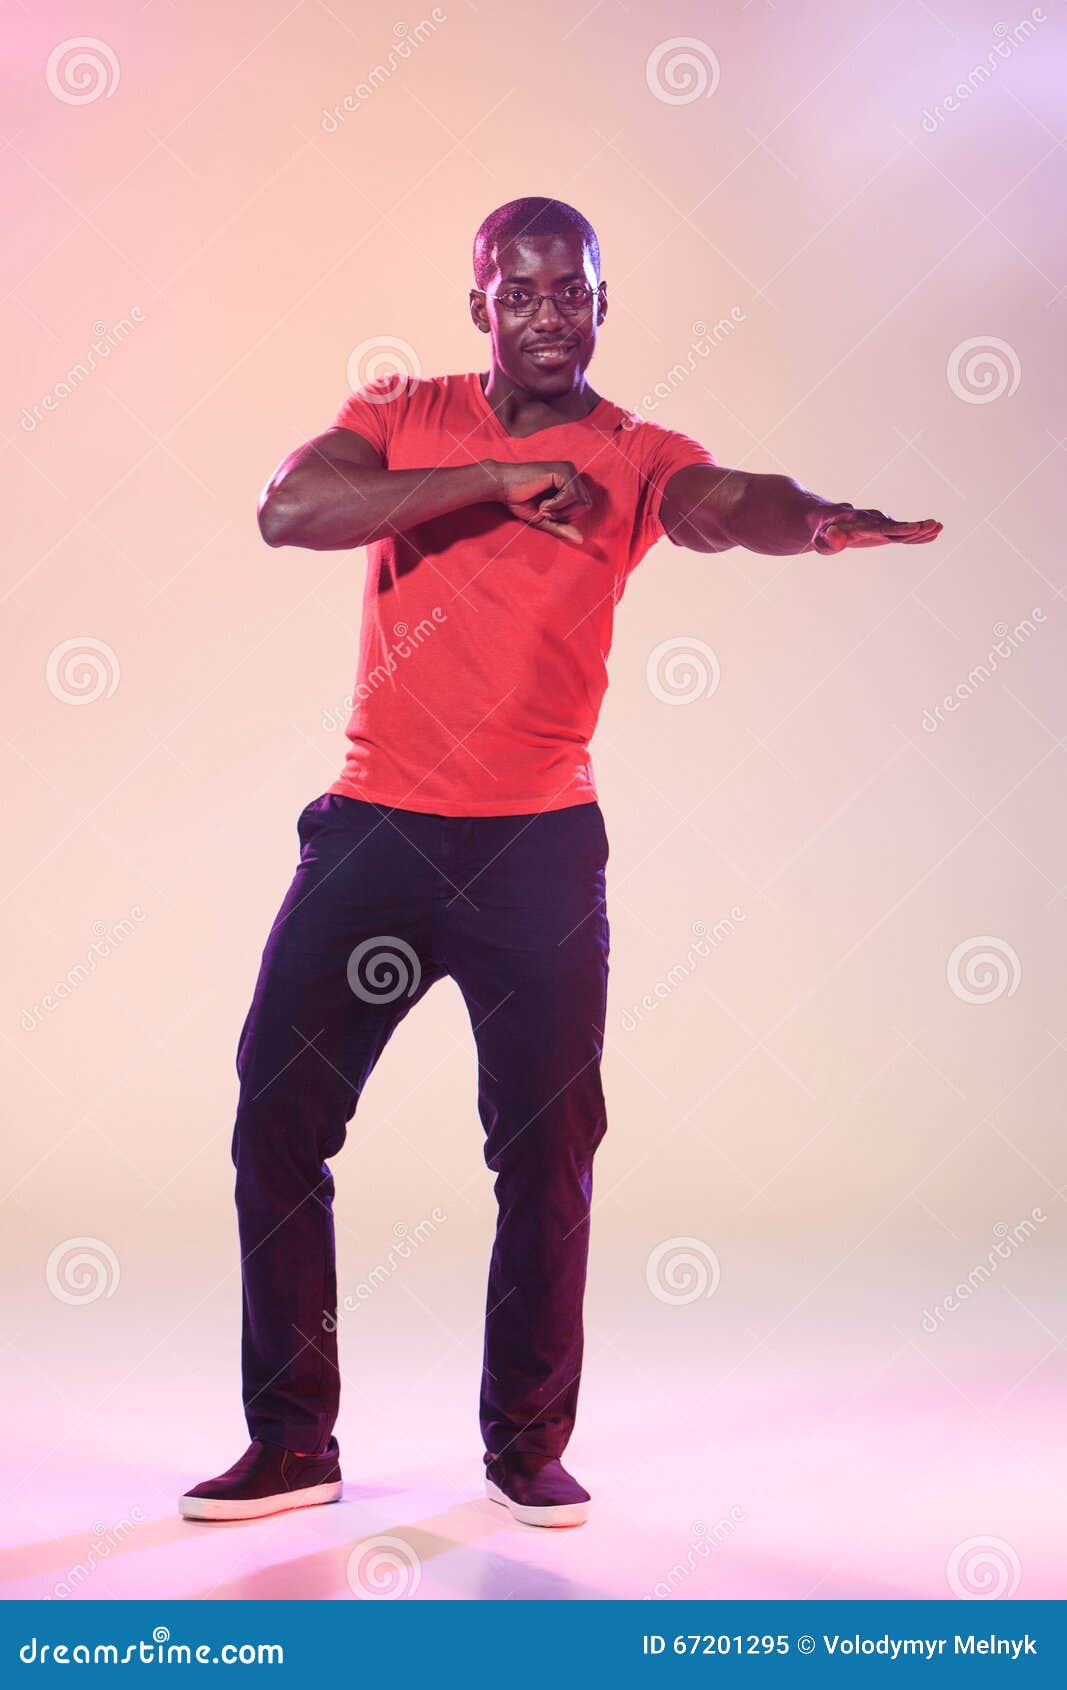 The Young Cool Black Man is Dancing Stock Image - Image of black, face ...